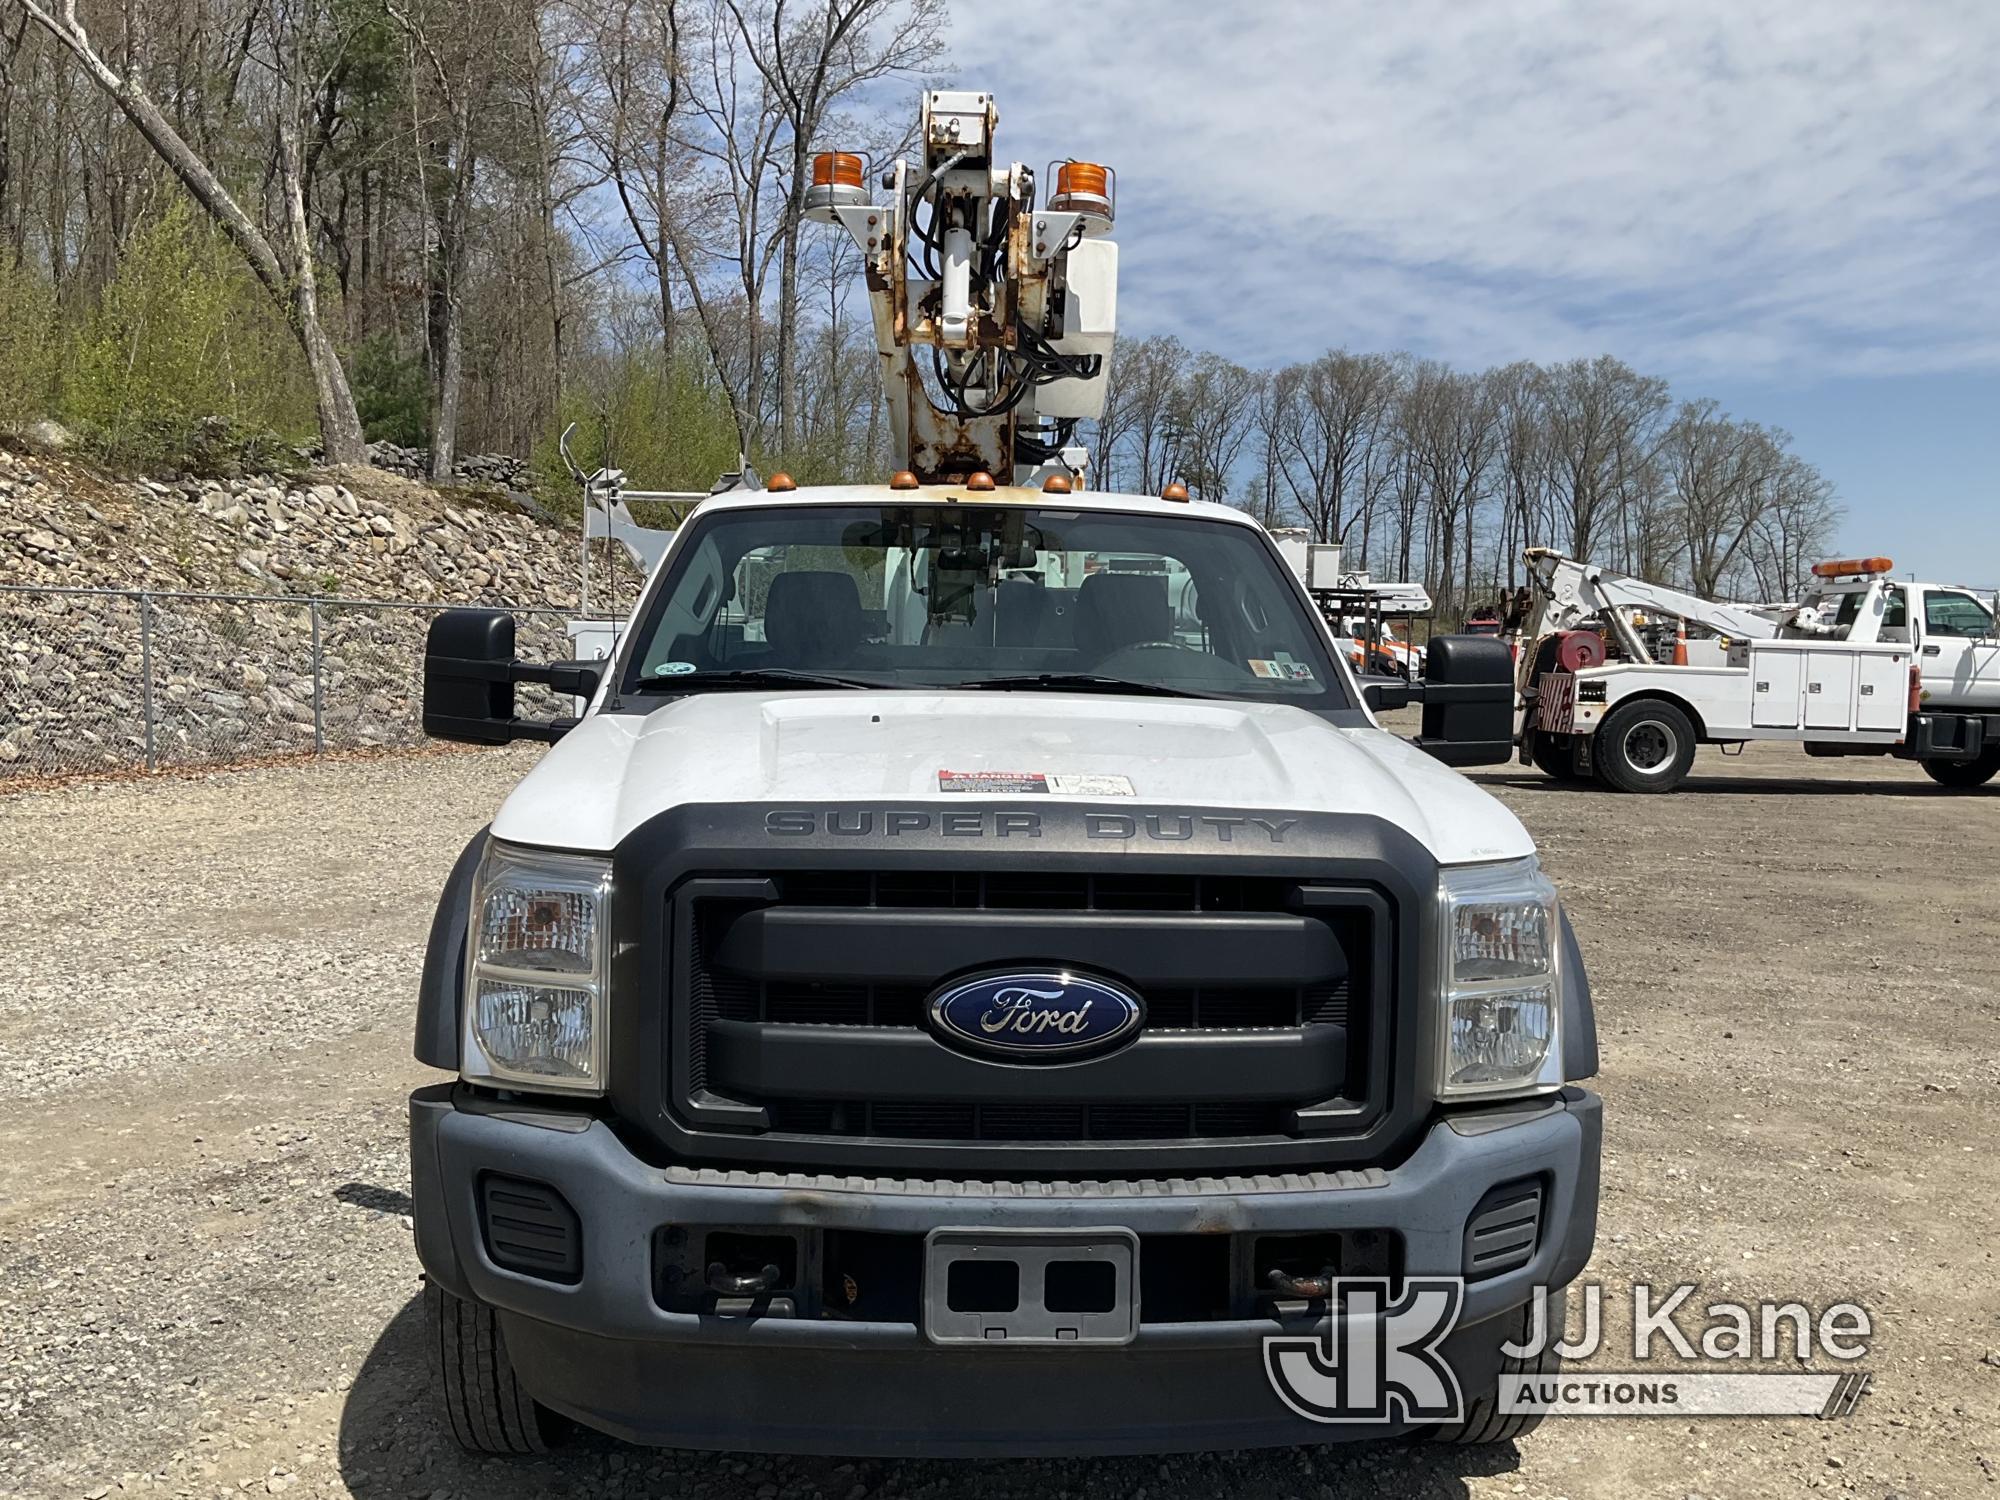 (Shrewsbury, MA) Altec AT200A, Telescopic Non-Insulated Bucket Truck mounted behind cab on 2014 Ford